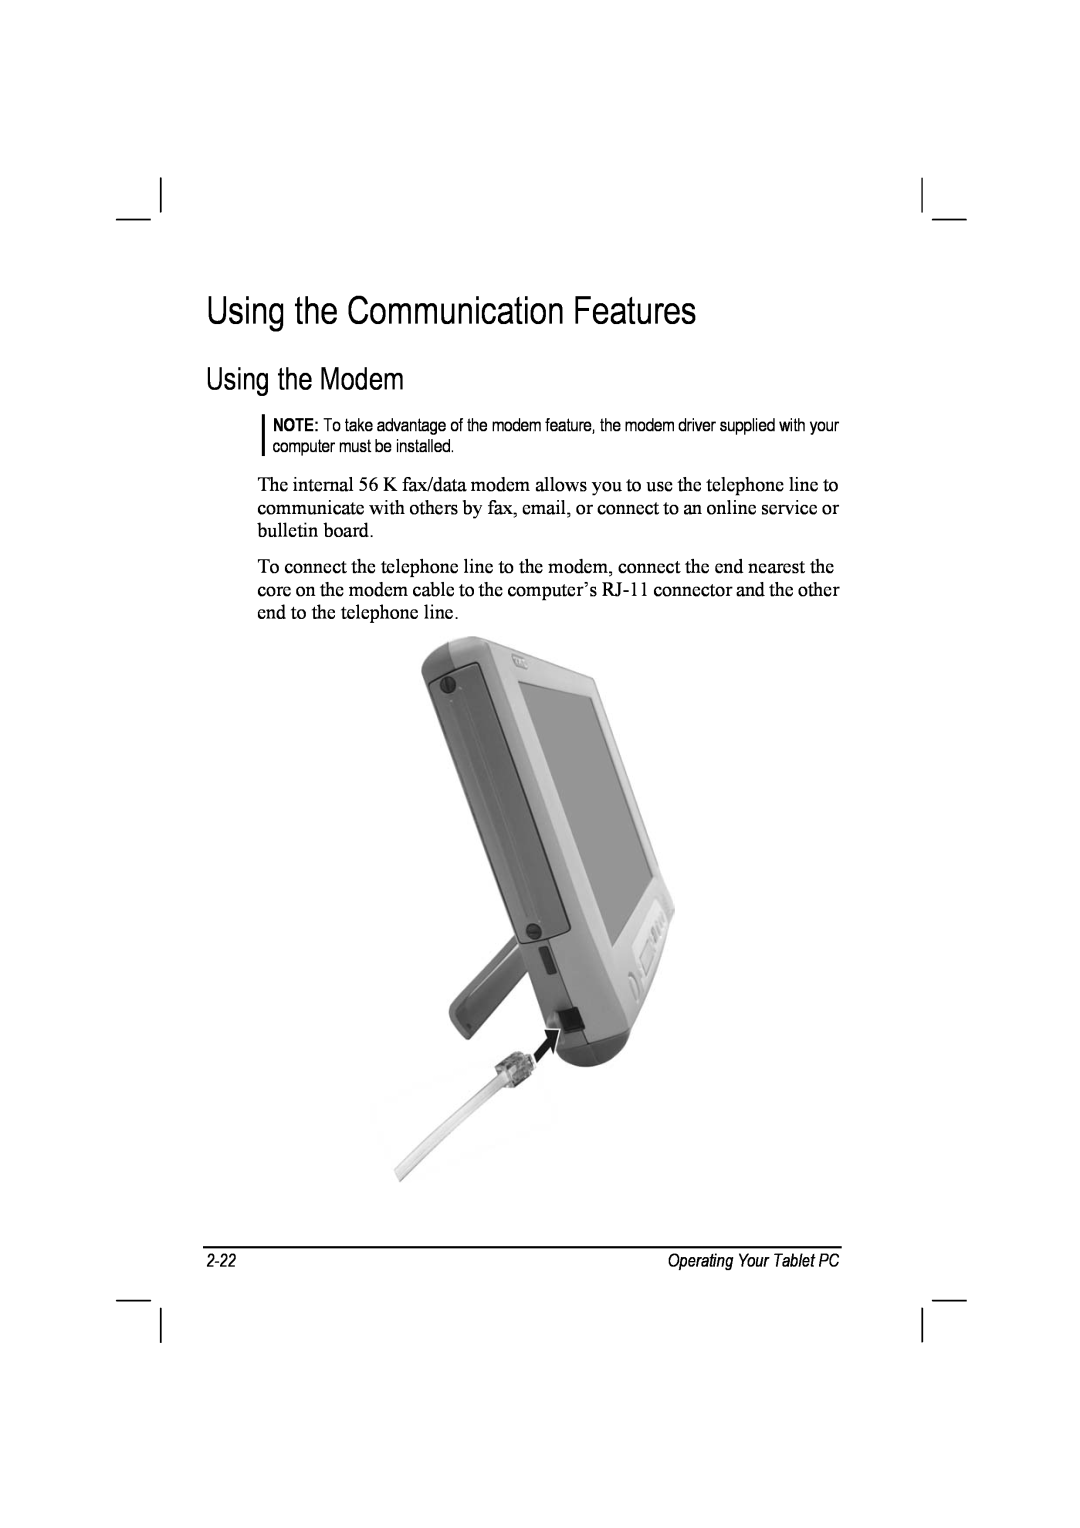 TAG 10 manual Using the Communication Features, Using the Modem 